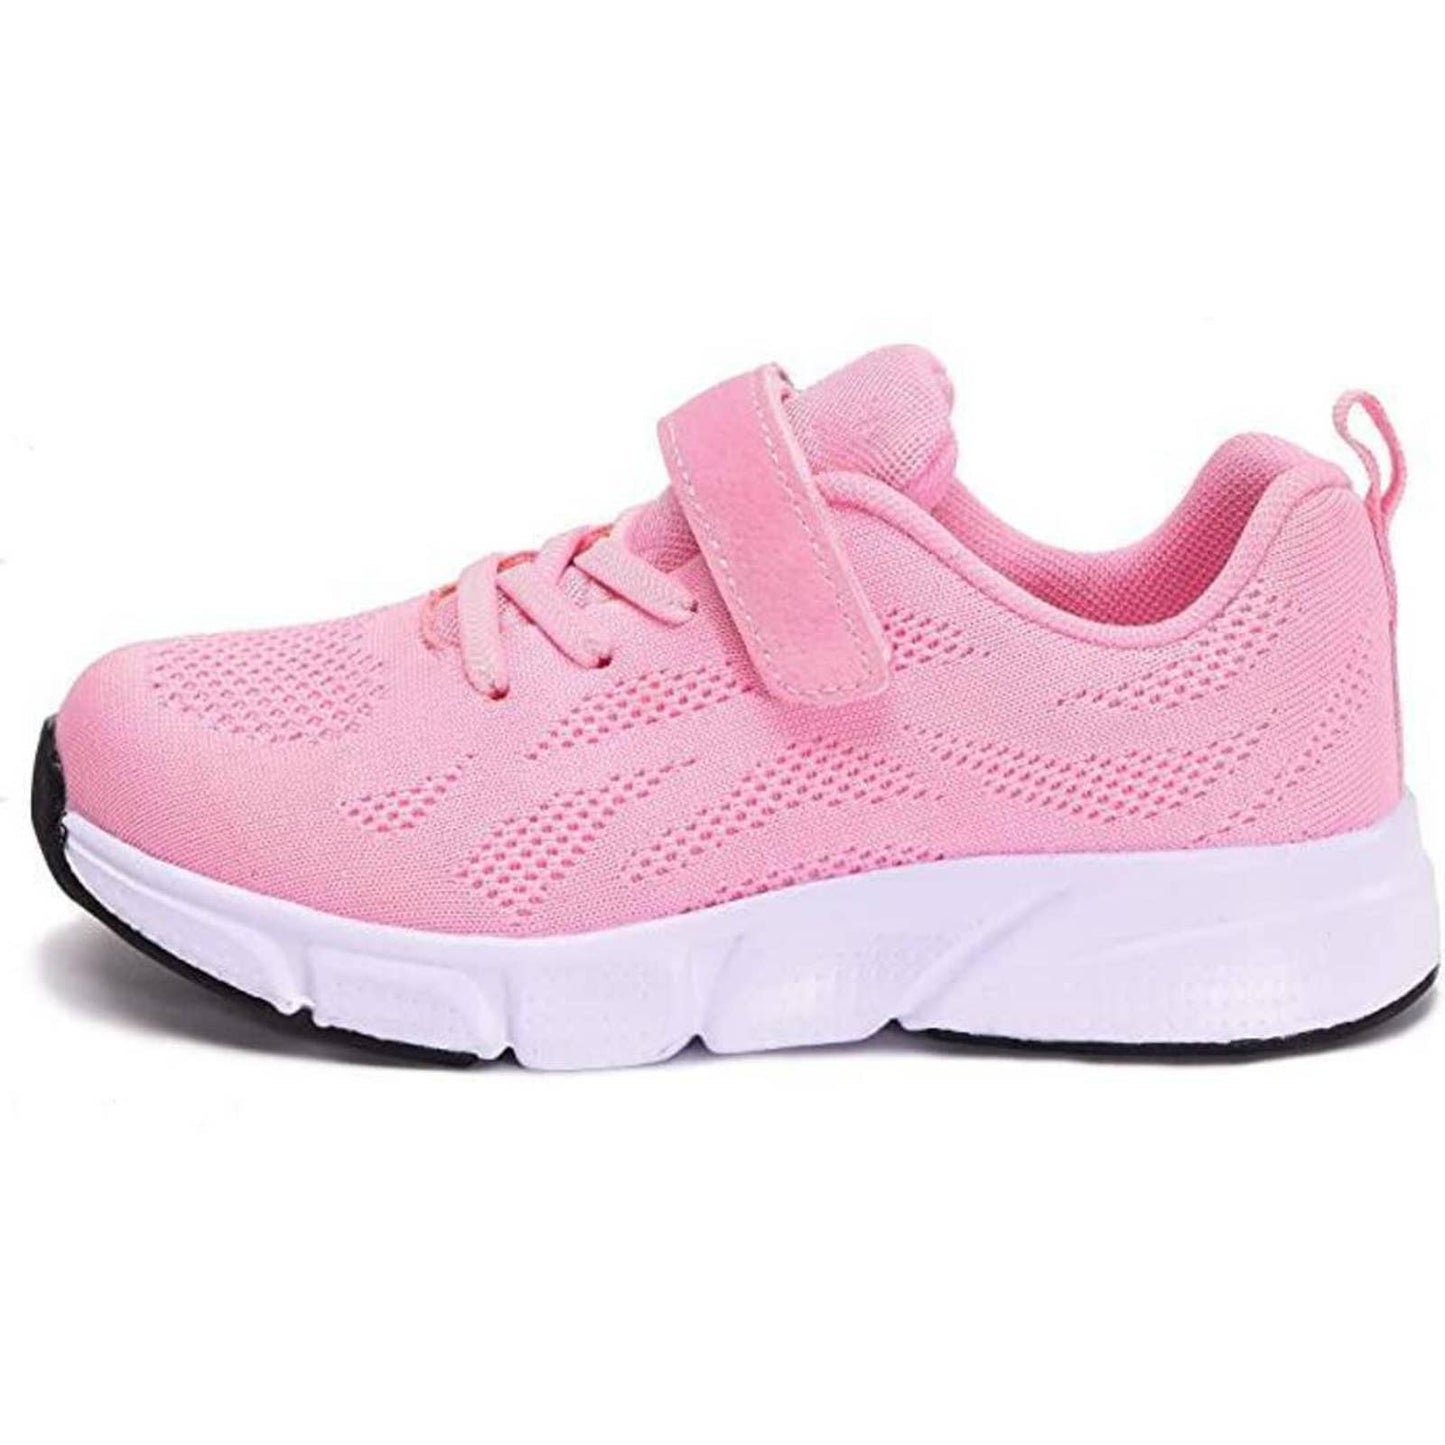 KVbabby Trainers children's sports shoes breathable trainers EU 28 / 11 US